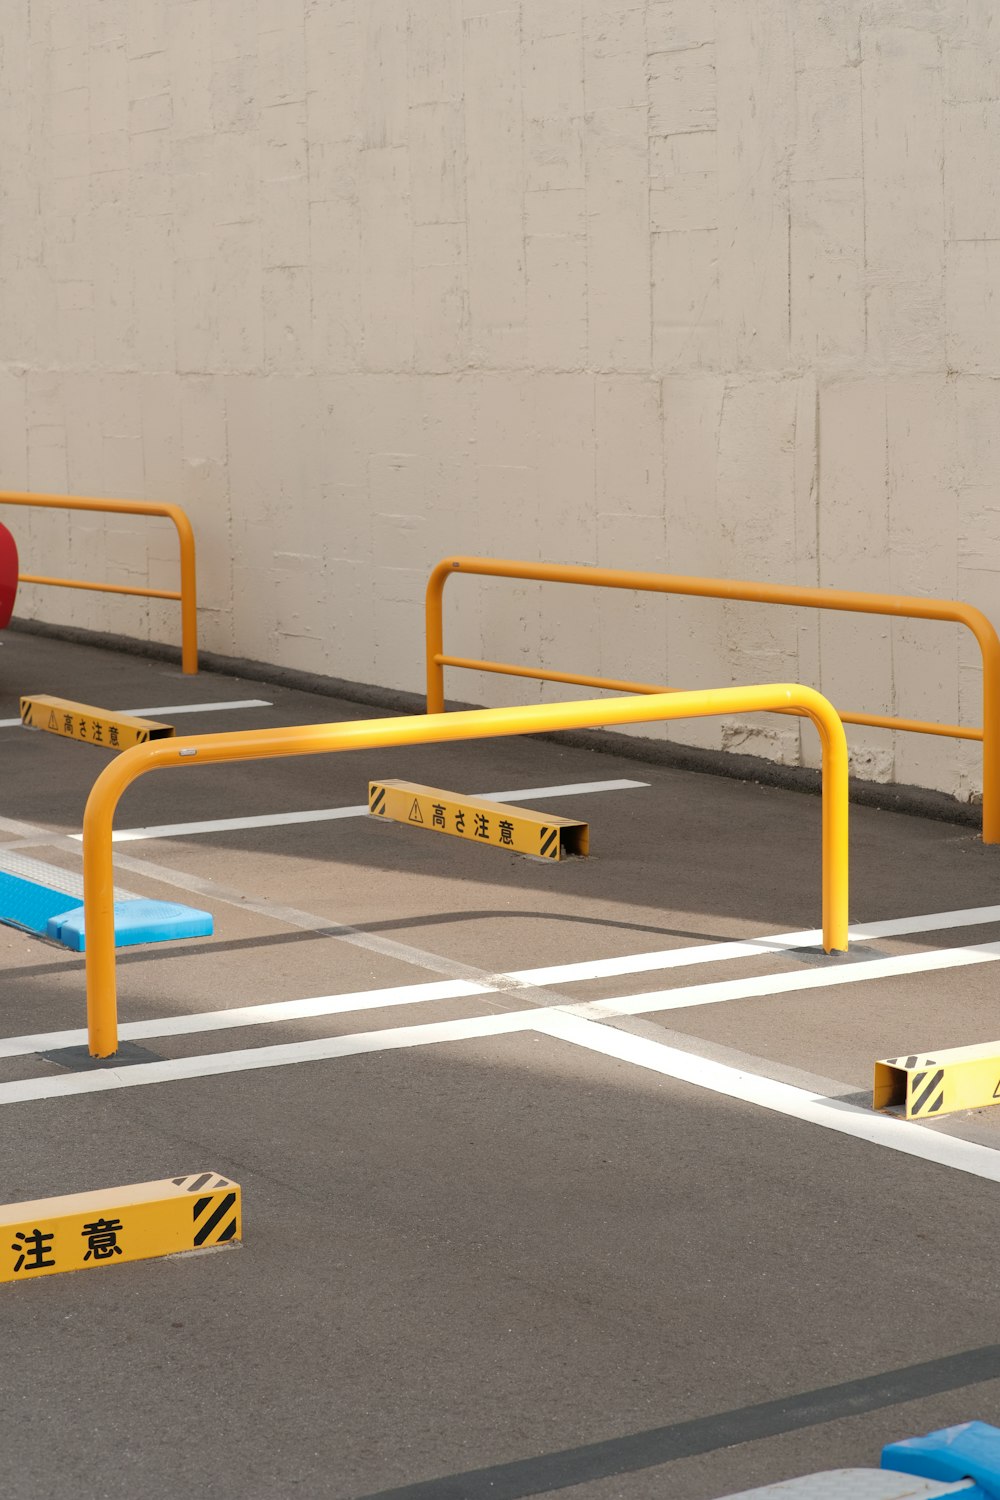 a parking lot with yellow and blue barriers